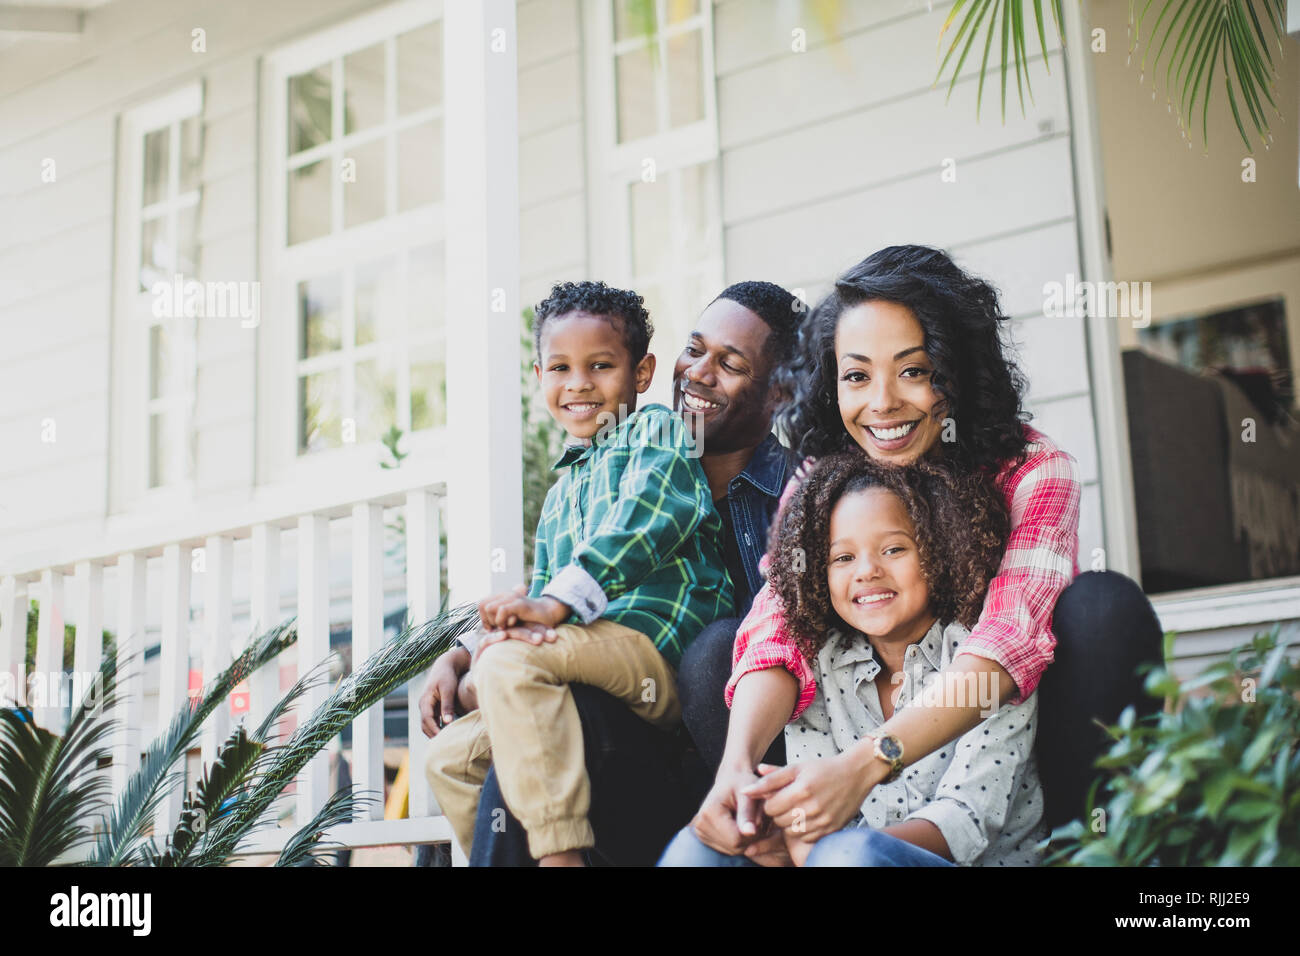 Portrait of African American family sitting outside home Banque D'Images